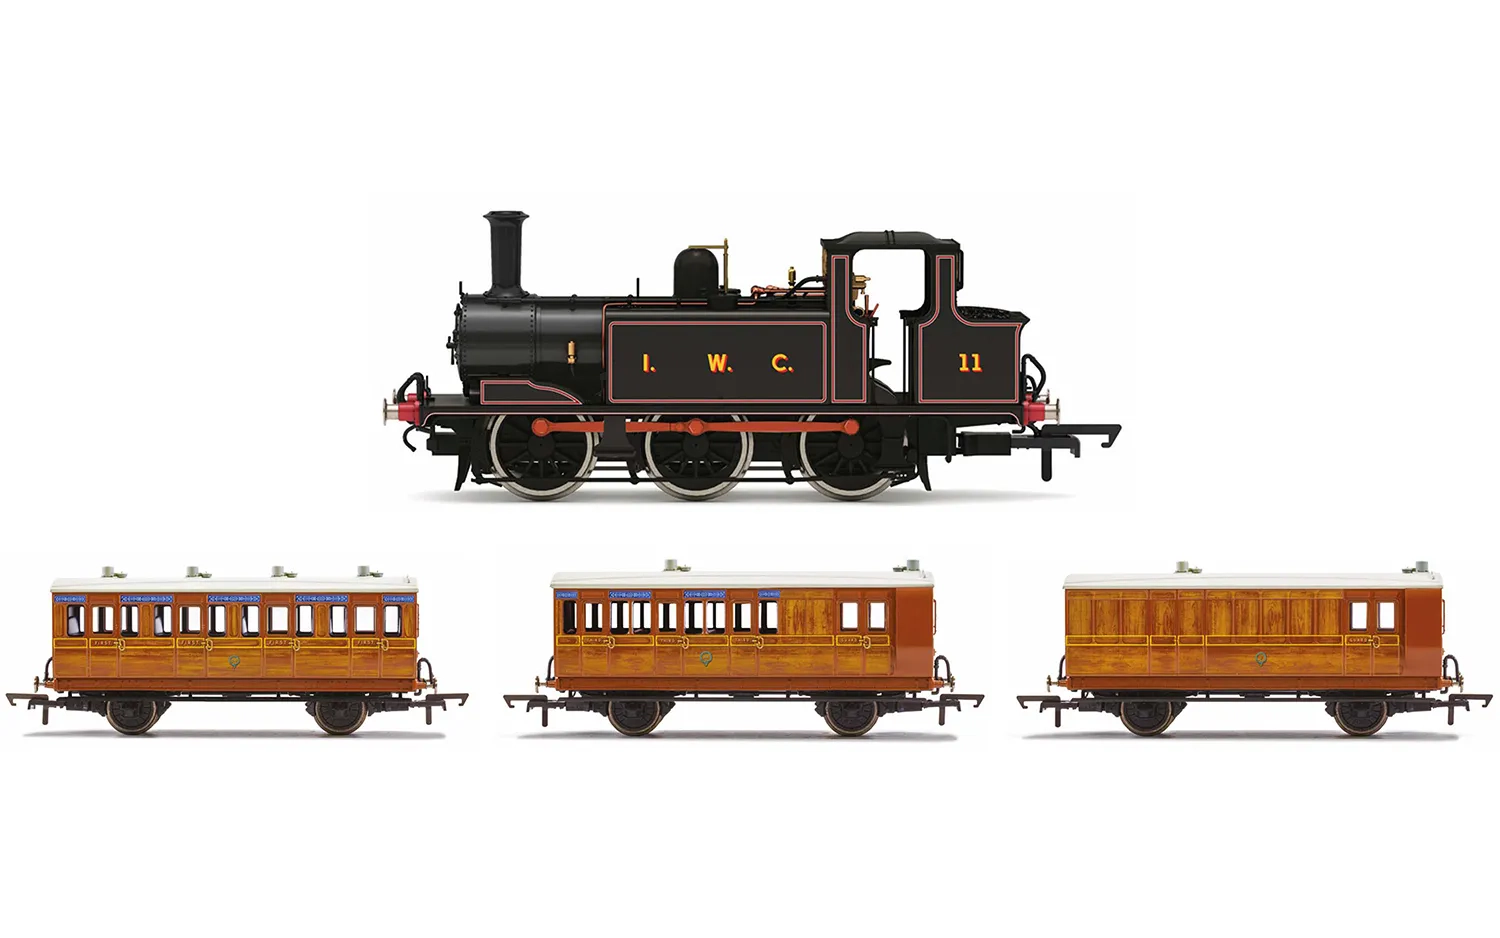 Isle of Wight Central Railway, Terrier Train Pack - Era 3